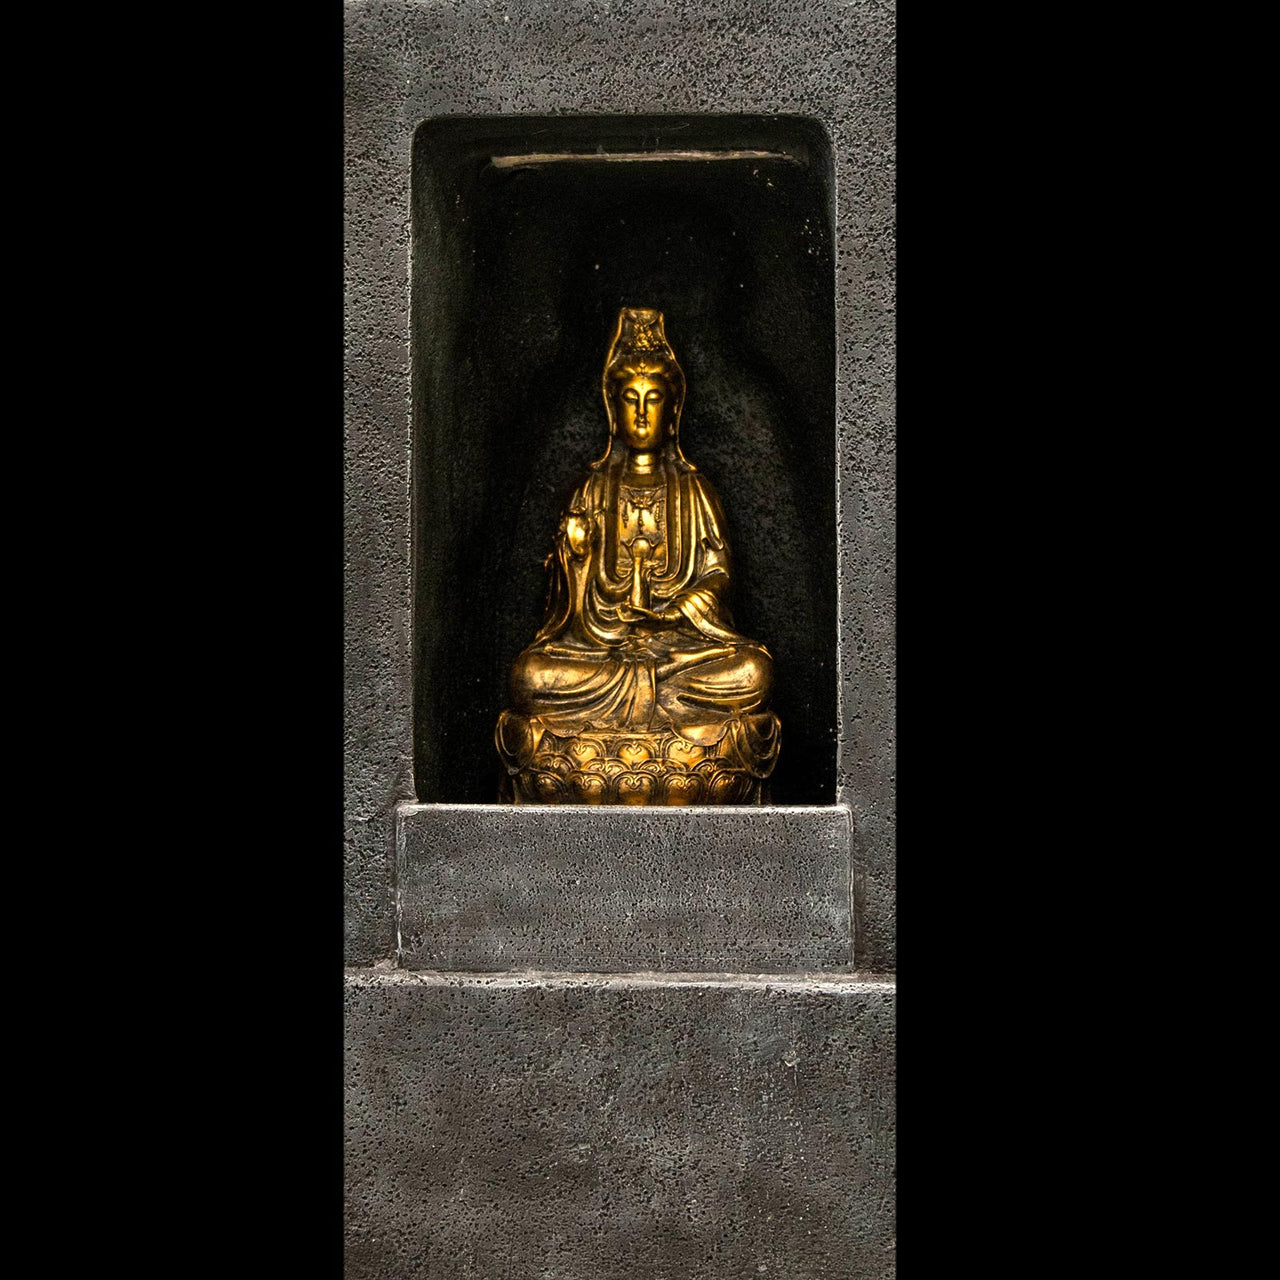 HCFT5203 - Gold Buddha in Grotto Fountain